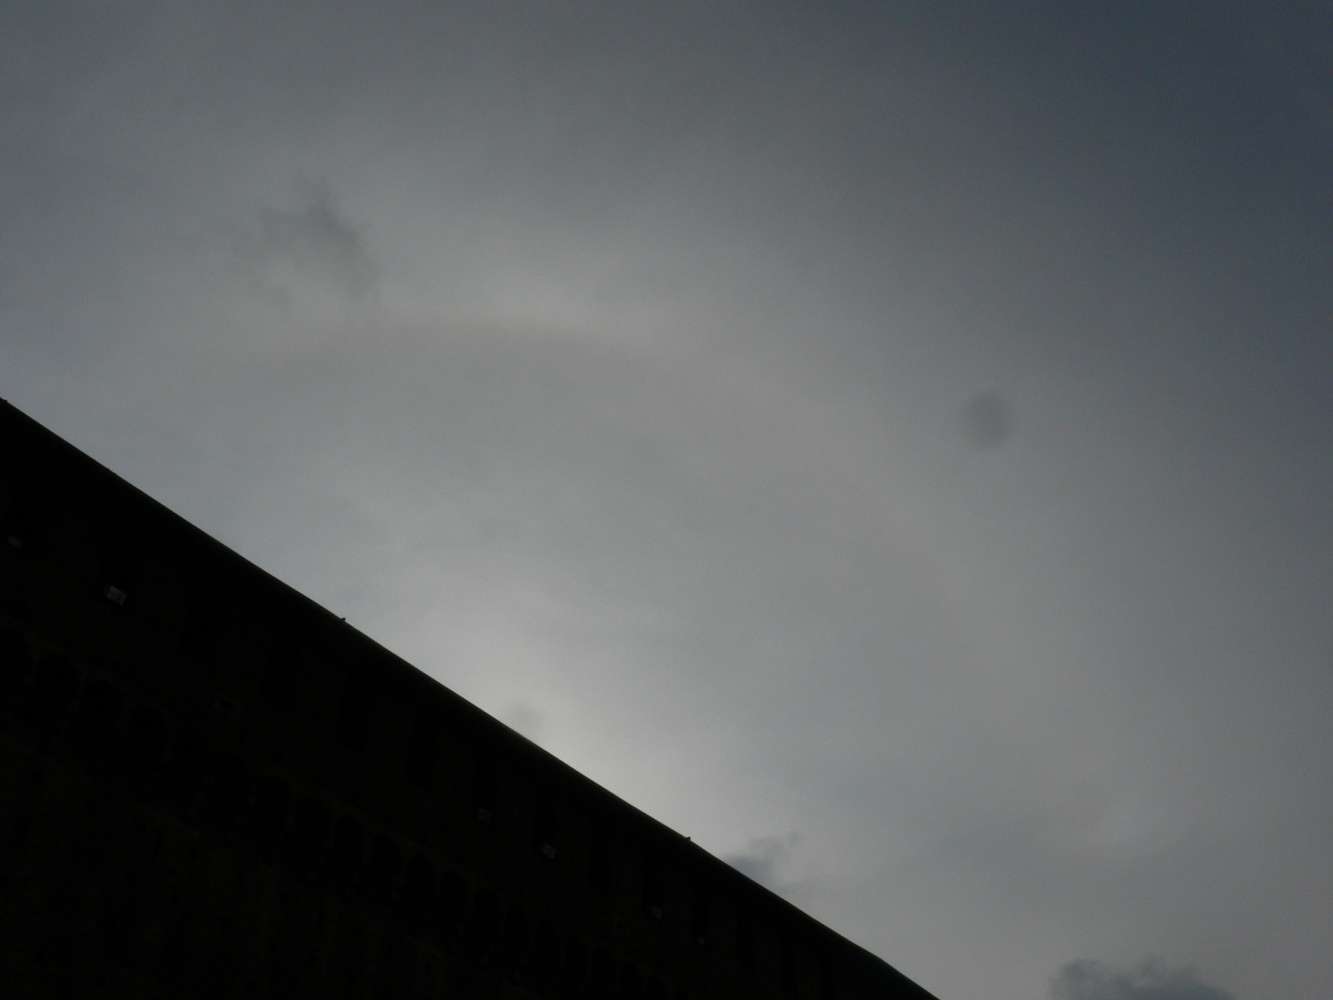 Solar circle with right sundog: 29 KB; click on the image to enlarge